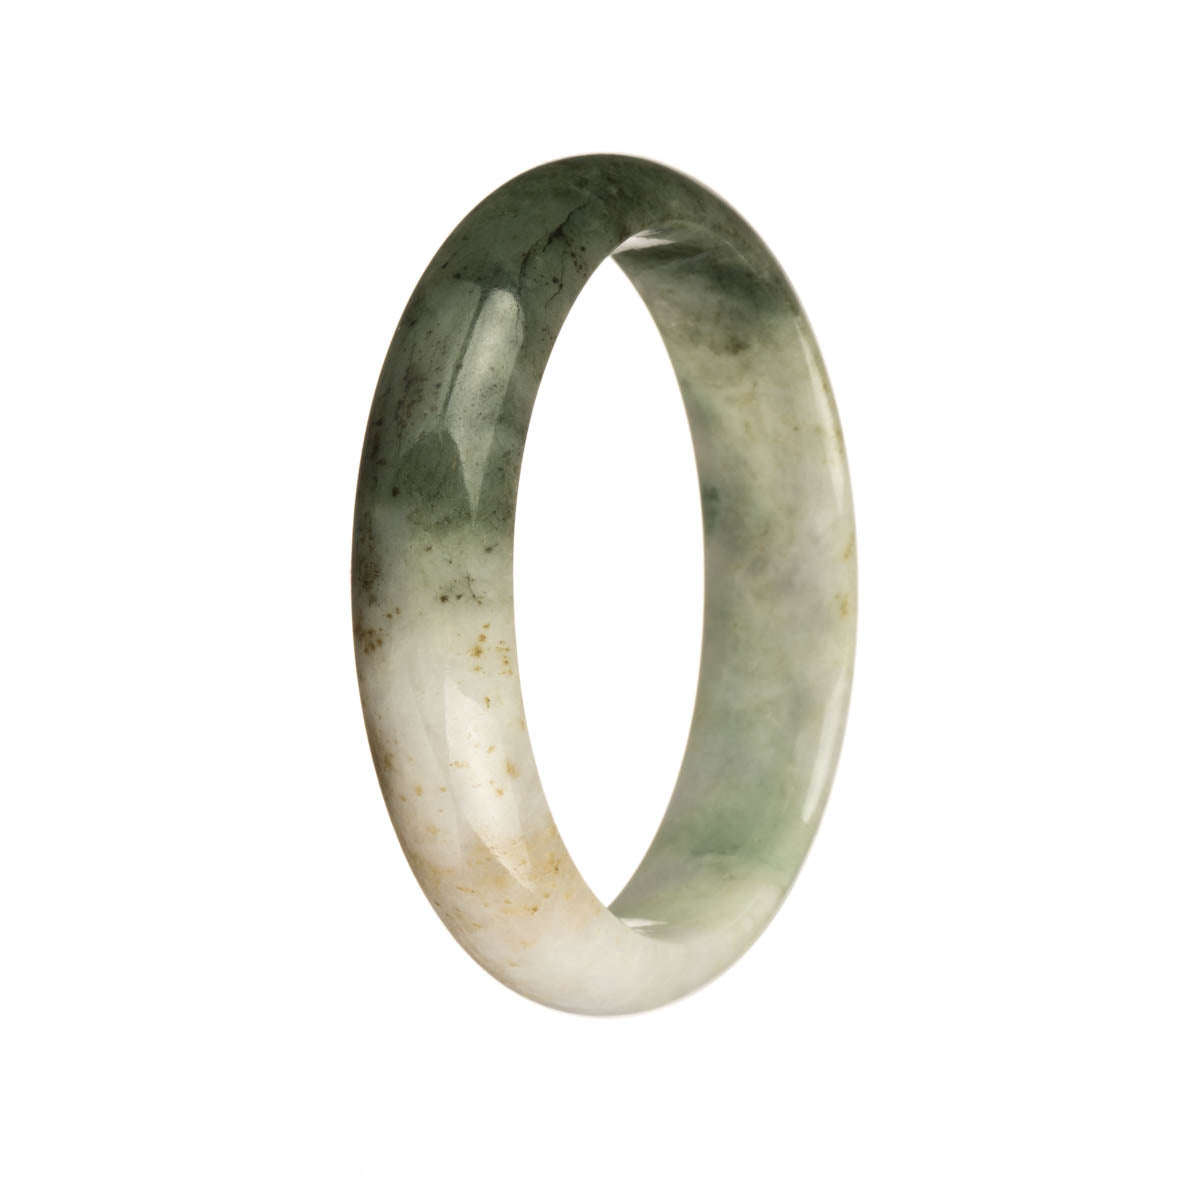 A close-up image of a jade bracelet, featuring a mix of white, dark green, brown, and green spots. The bracelet is made of genuine untreated jadeite jade and has a 56mm half-moon shape.